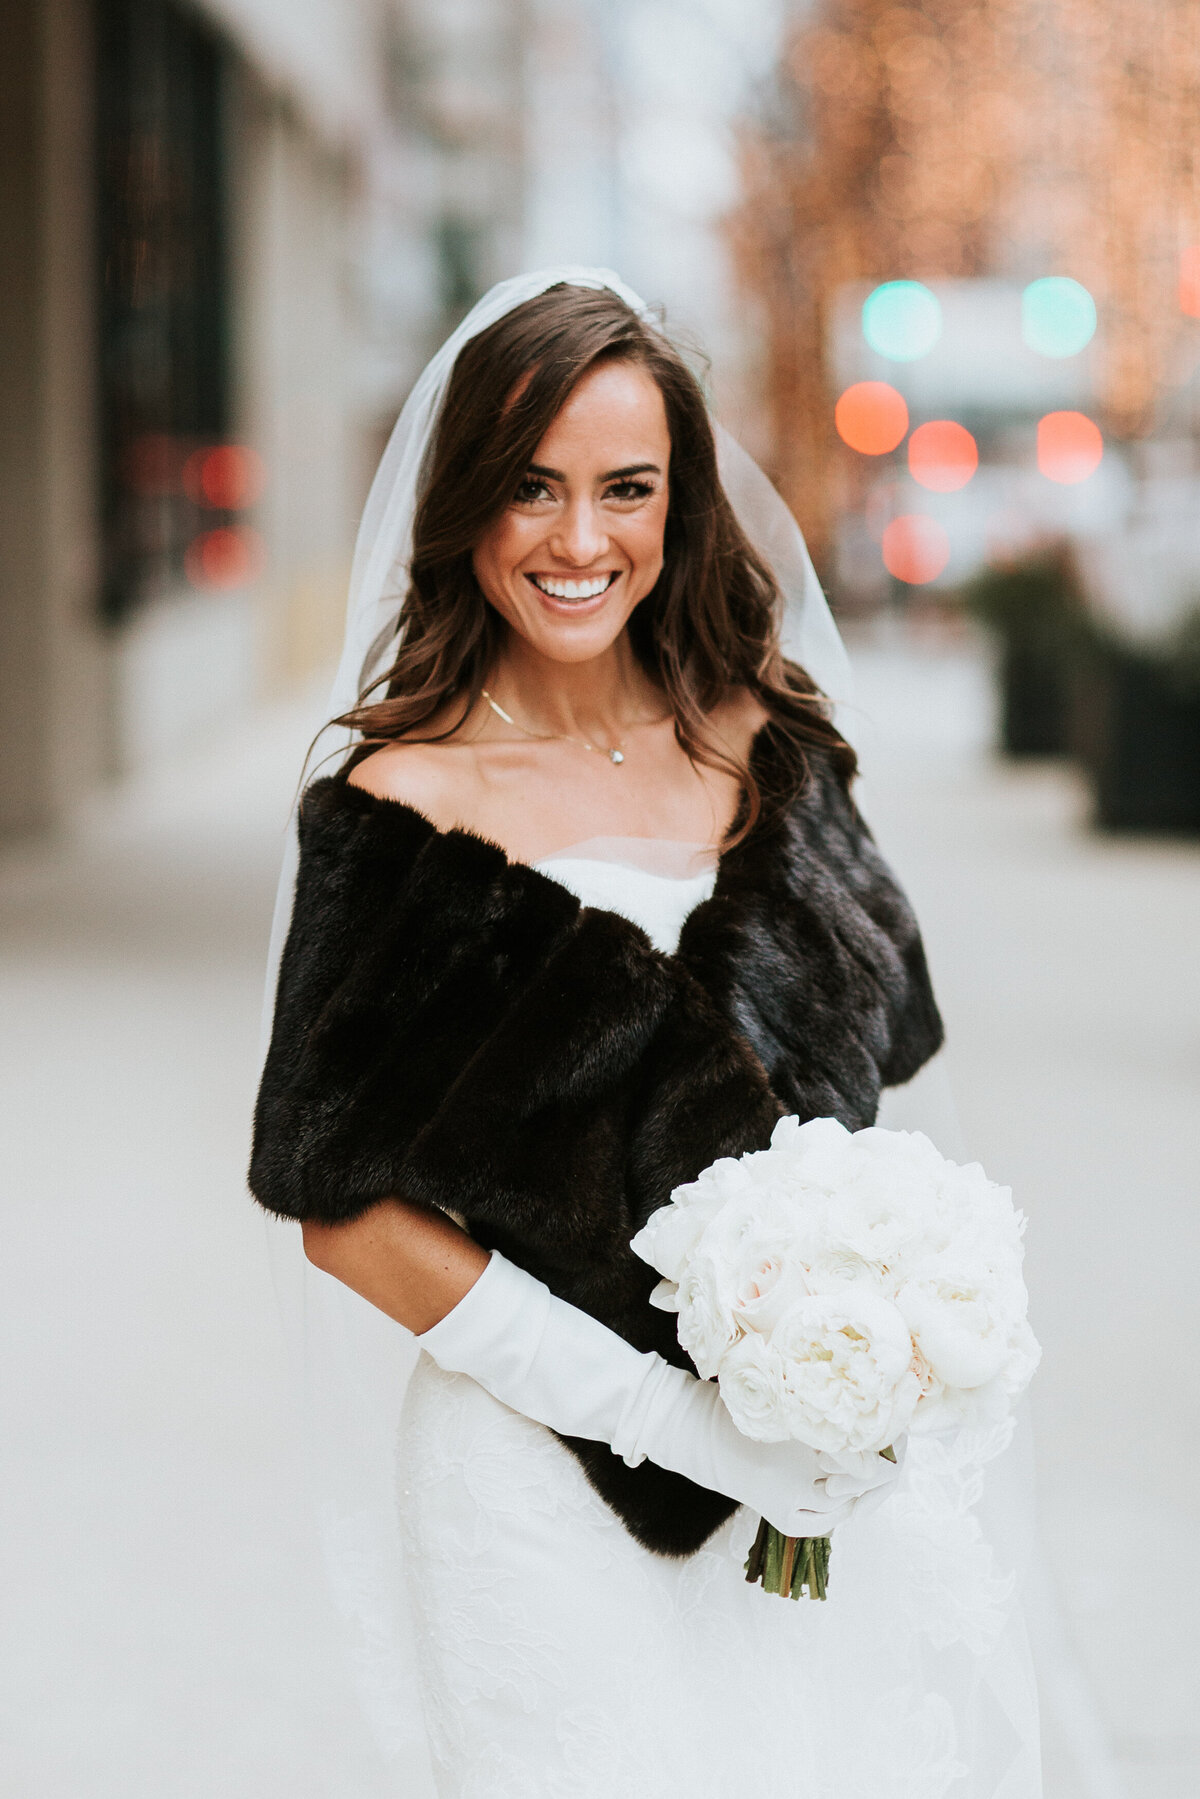 Bride wearing stole and wearing bouquet standing outside